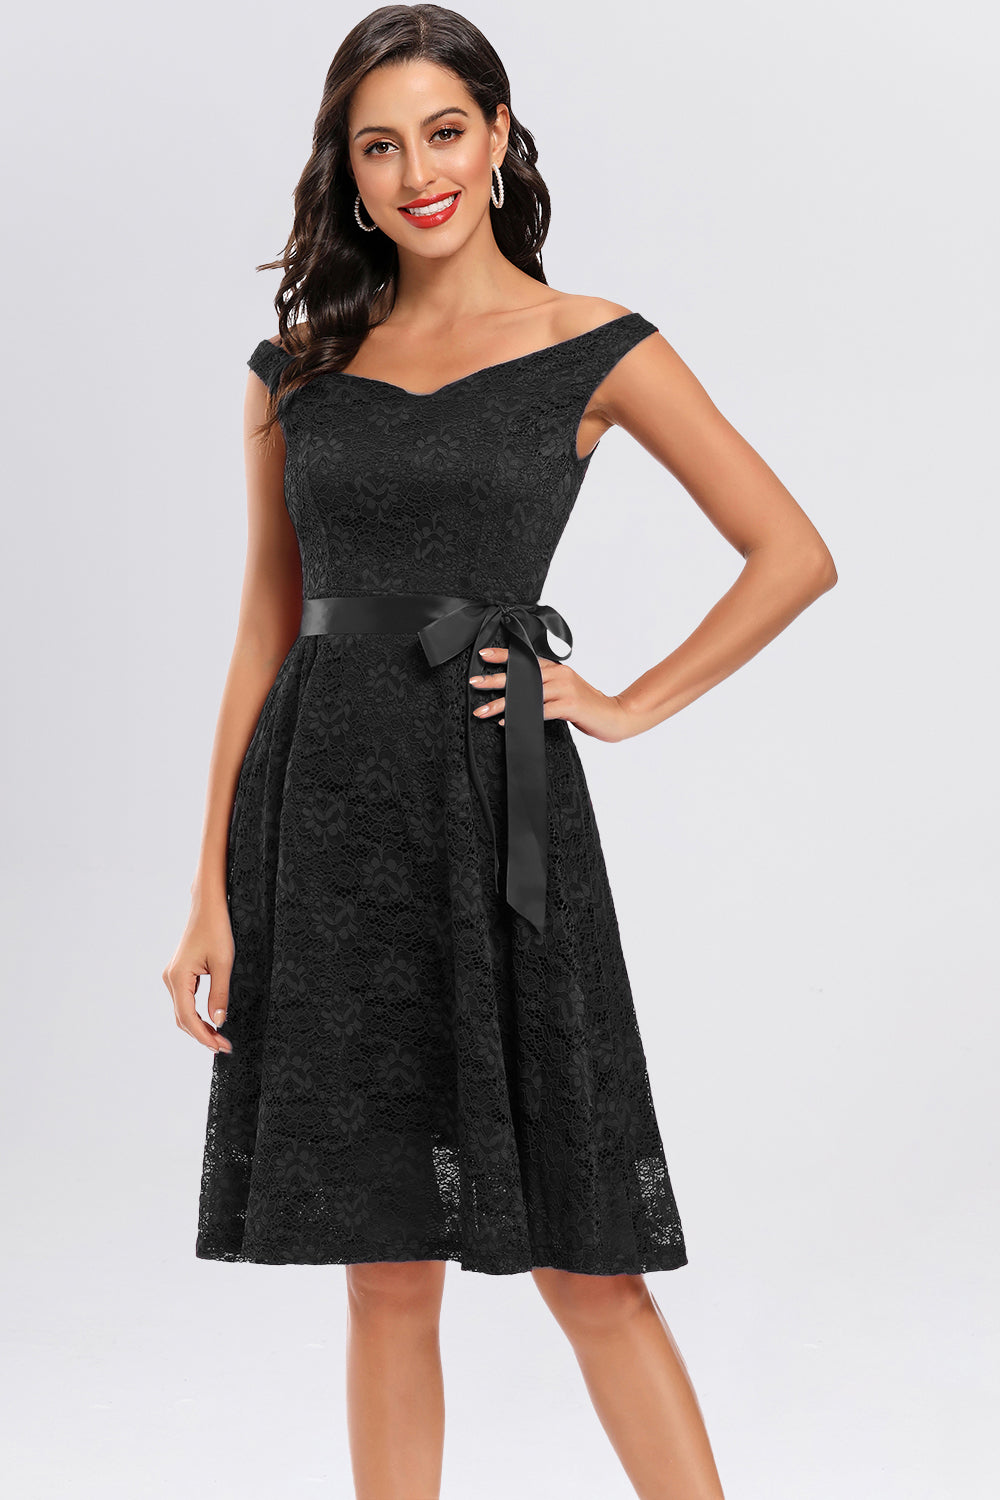 Backless Lace Off the Shoulder Homecoming Dresses